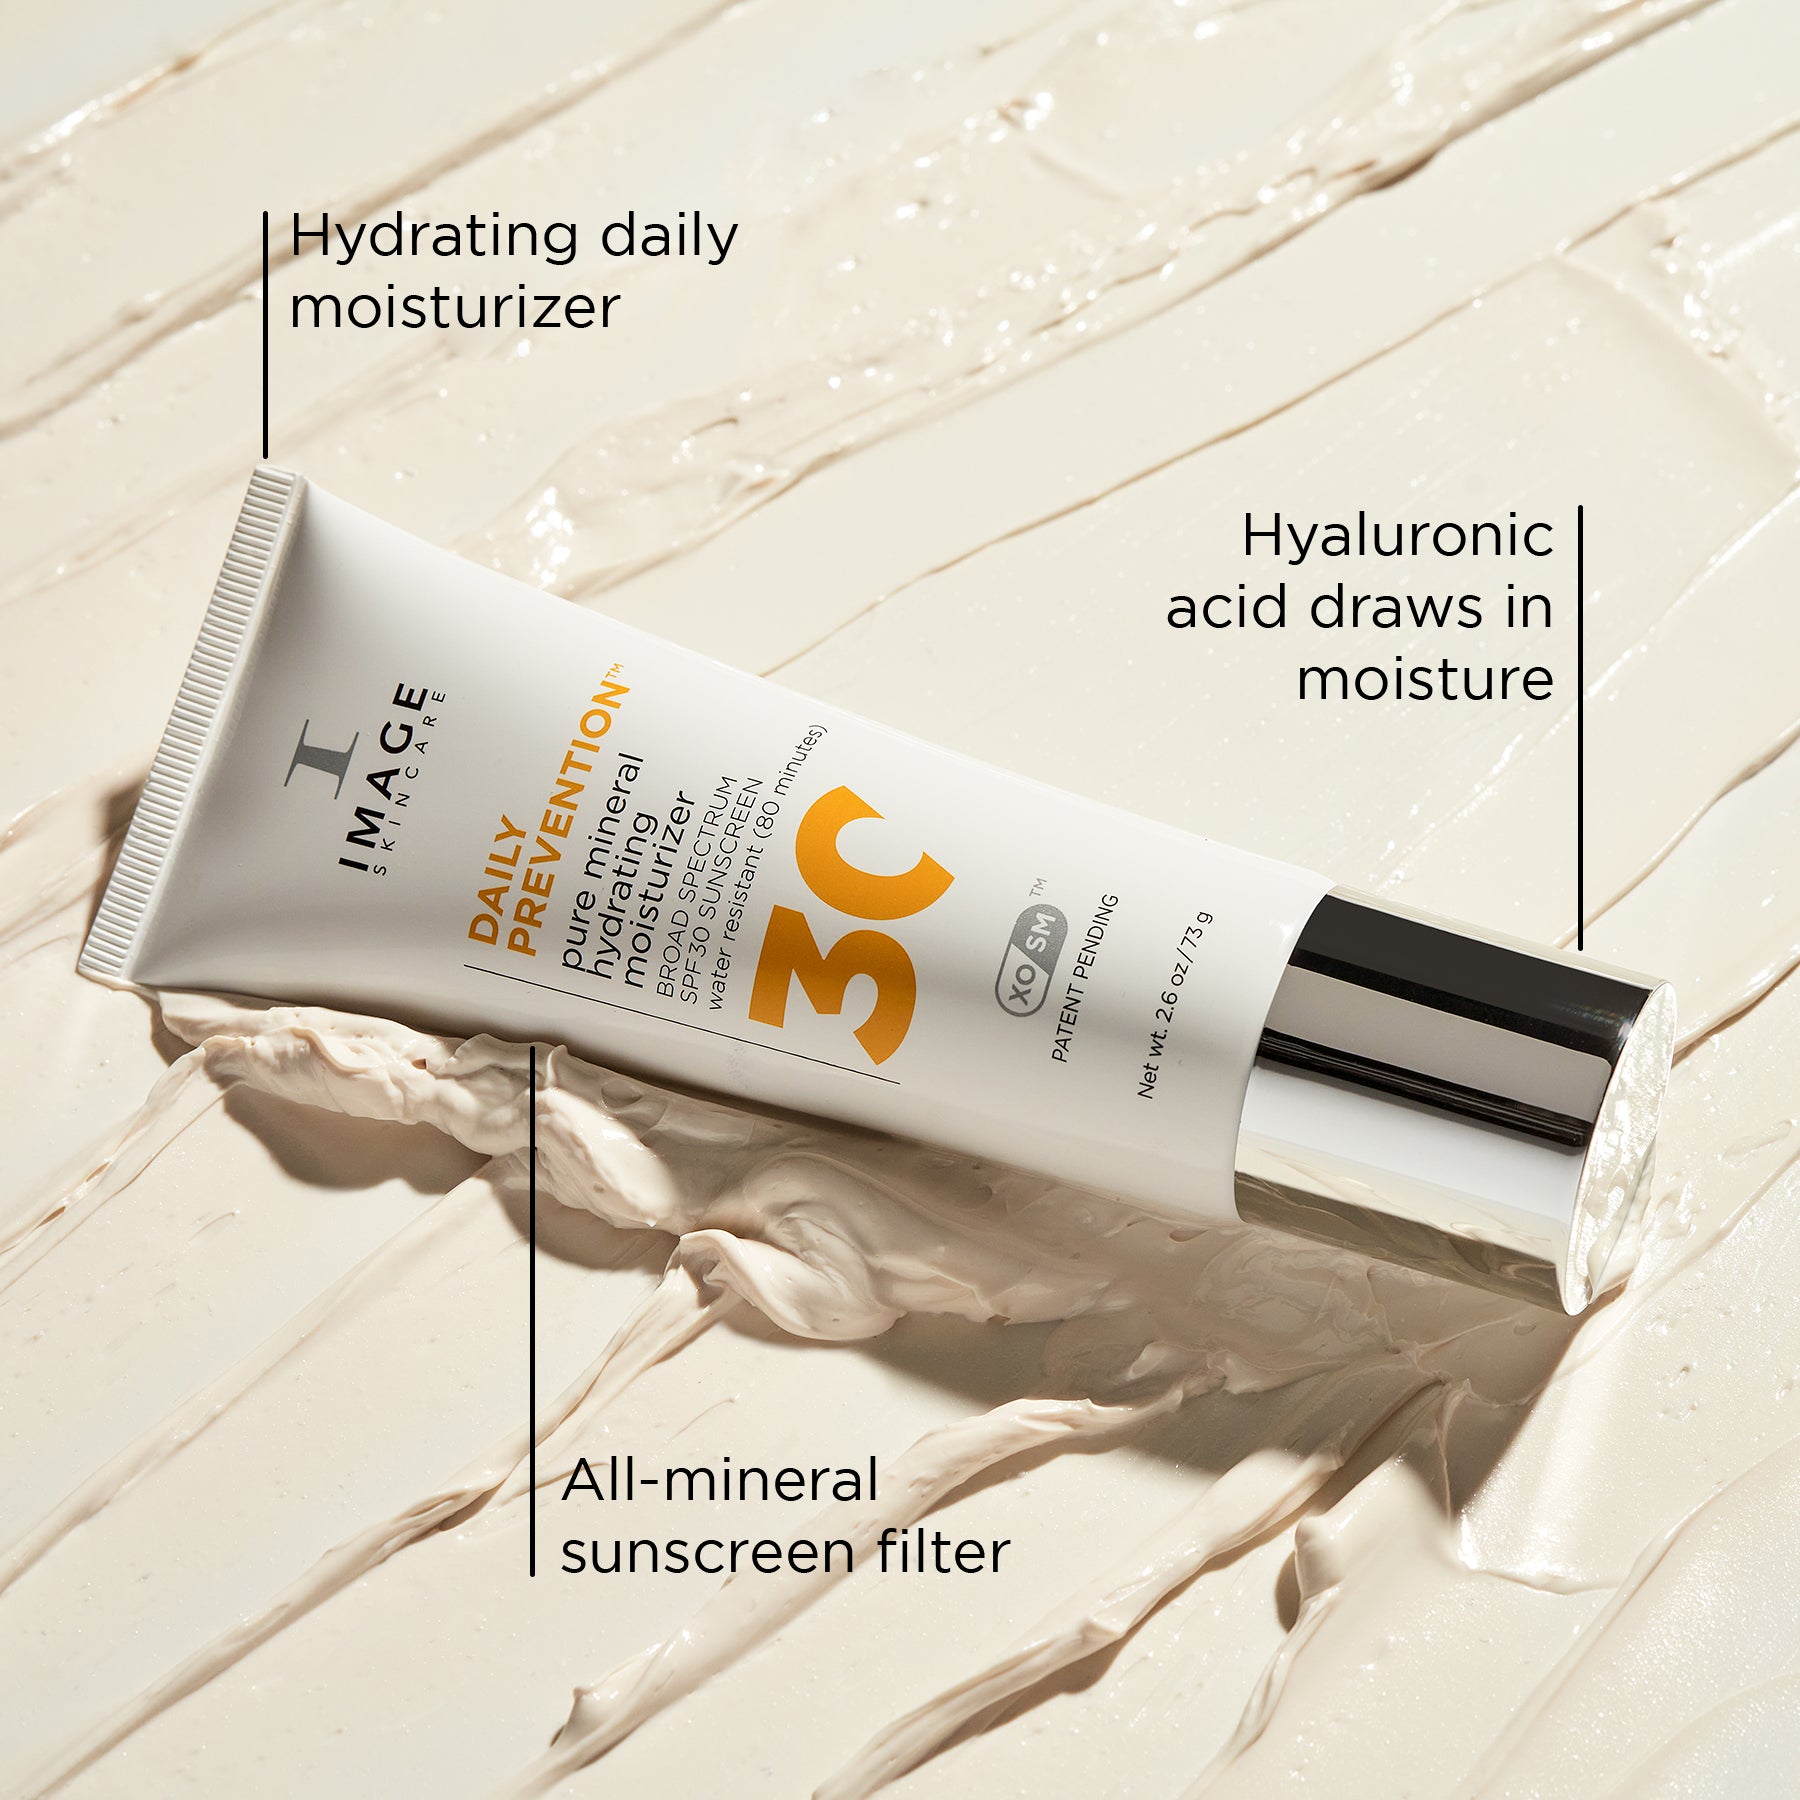 A tube of DAILY Prevention pure mineral hydrating face moisturizer with sunscreen, showing product texture and benefits.